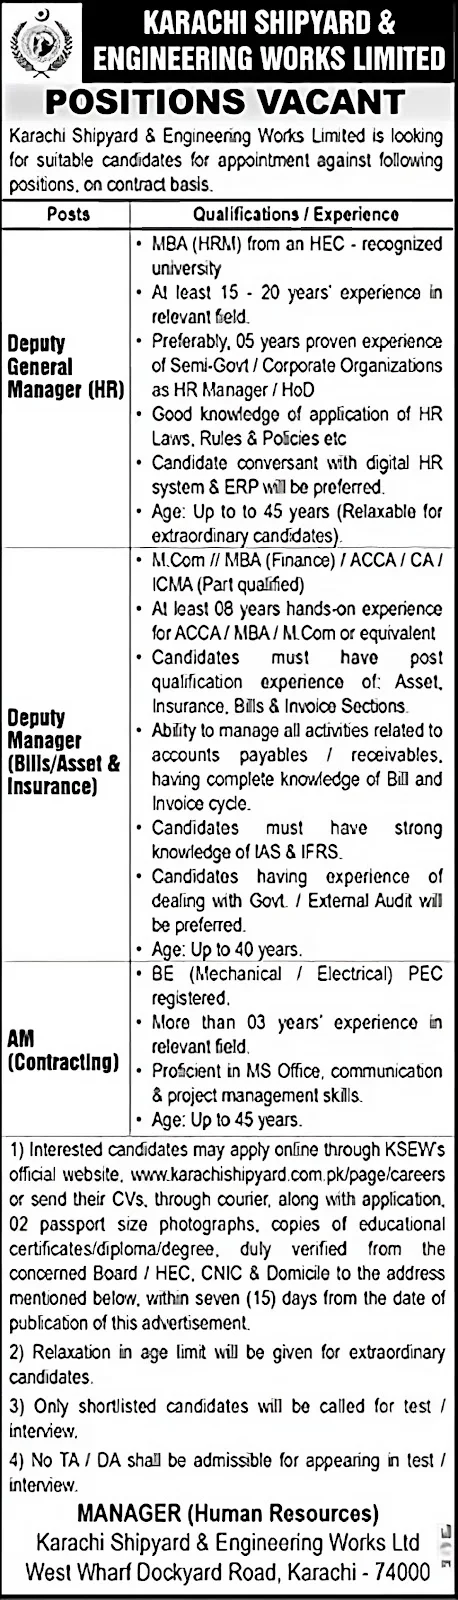 Advertisment of Government Jobs in Karachi Shipyard and Engineering Works Limited